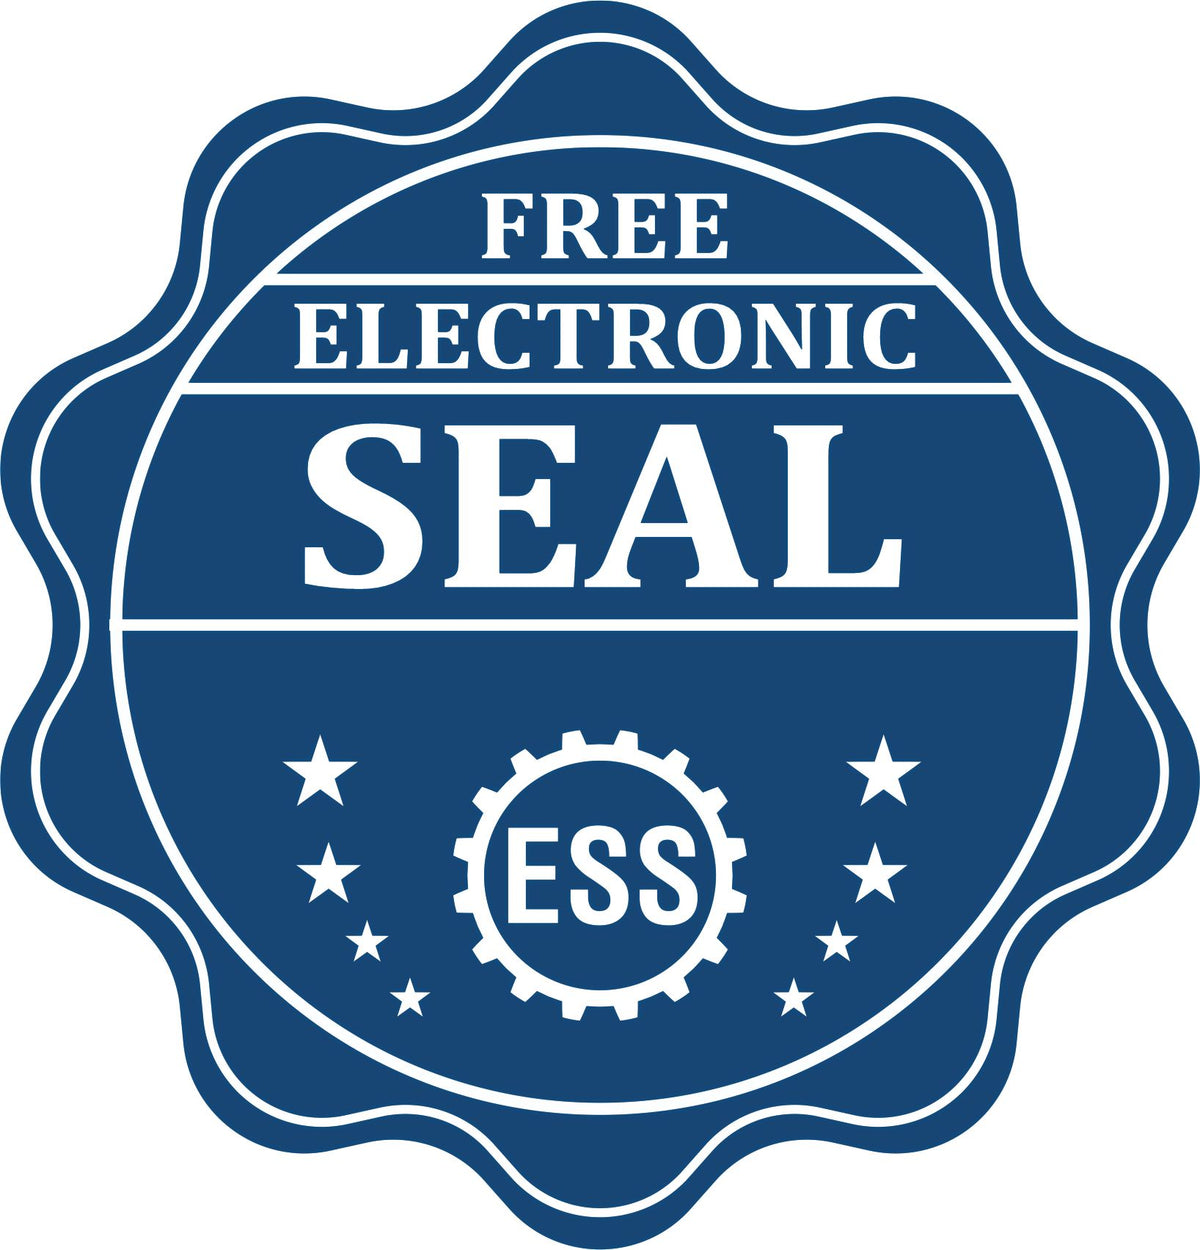 A badge showing a free electronic seal for the State of Louisiana Extended Long Reach Engineer Seal with stars and the ESS gear on the emblem.